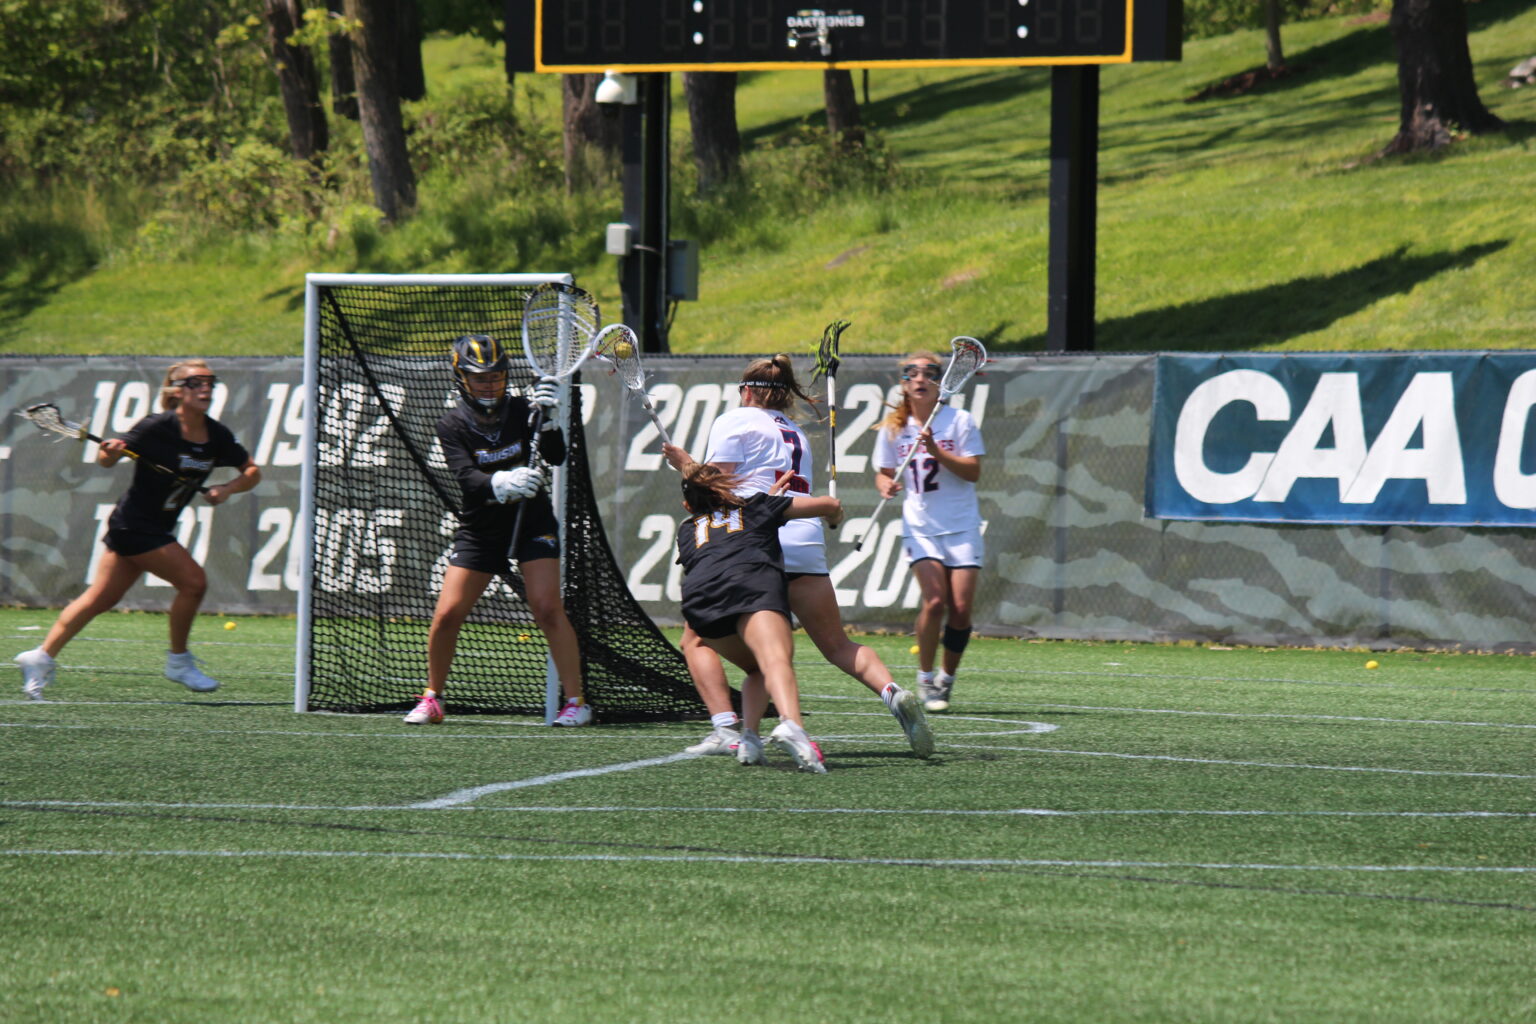 Towson Women’s Lacrosse blown out in CAA Championship game, falls 194